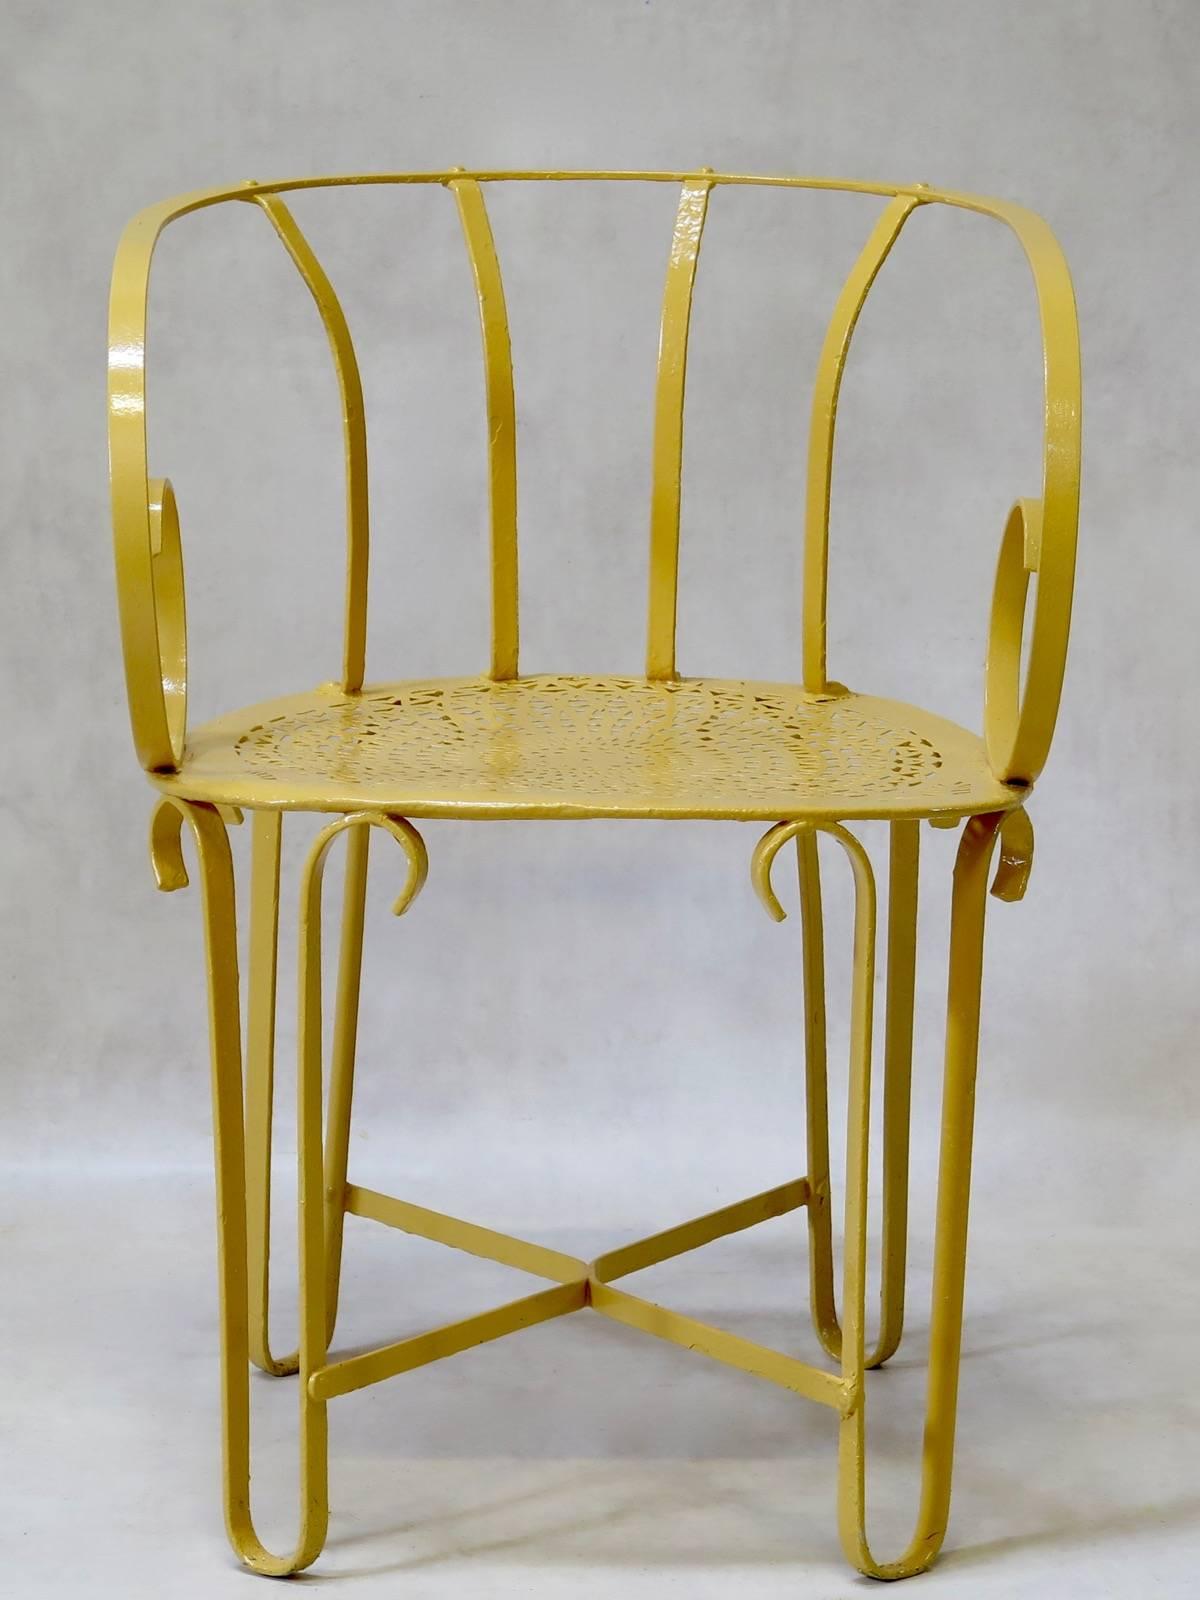 Unusual set of four wrought-iron armchairs, painted yellow. The chairs have rounded, barrel backs and scrolled armrests. The are riveted onto the bases, the large seats of which have a delicate, cutout pattern. The legs are joined by an X-shape